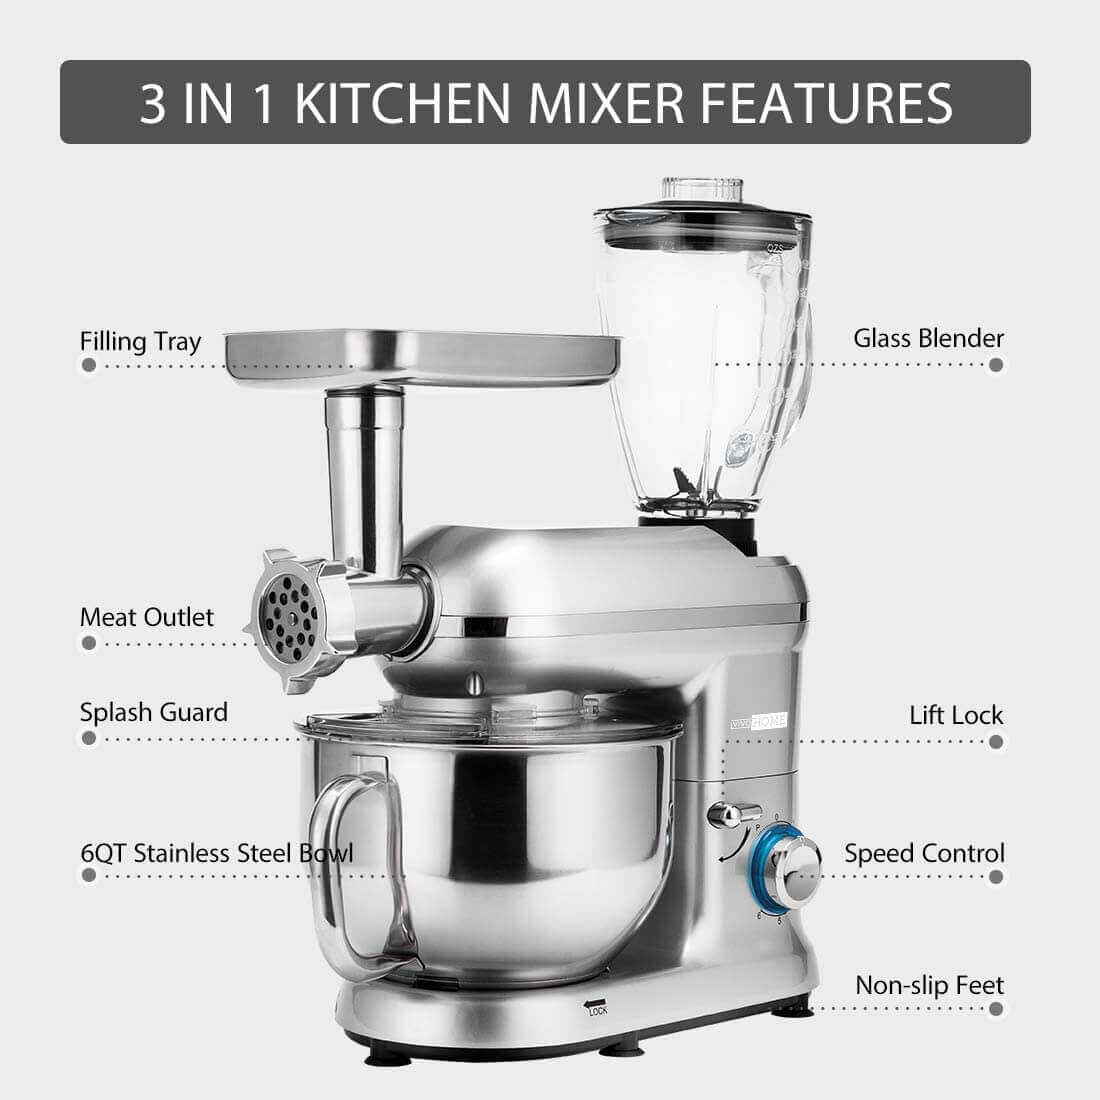 VIVOHOME 3 in 1 Multifunctional Stand Mixer with 6 Quart Stainless Steel Bowl, 650W 6-Speed Tilt-Head Meat Grinder Juice Blender, Silver